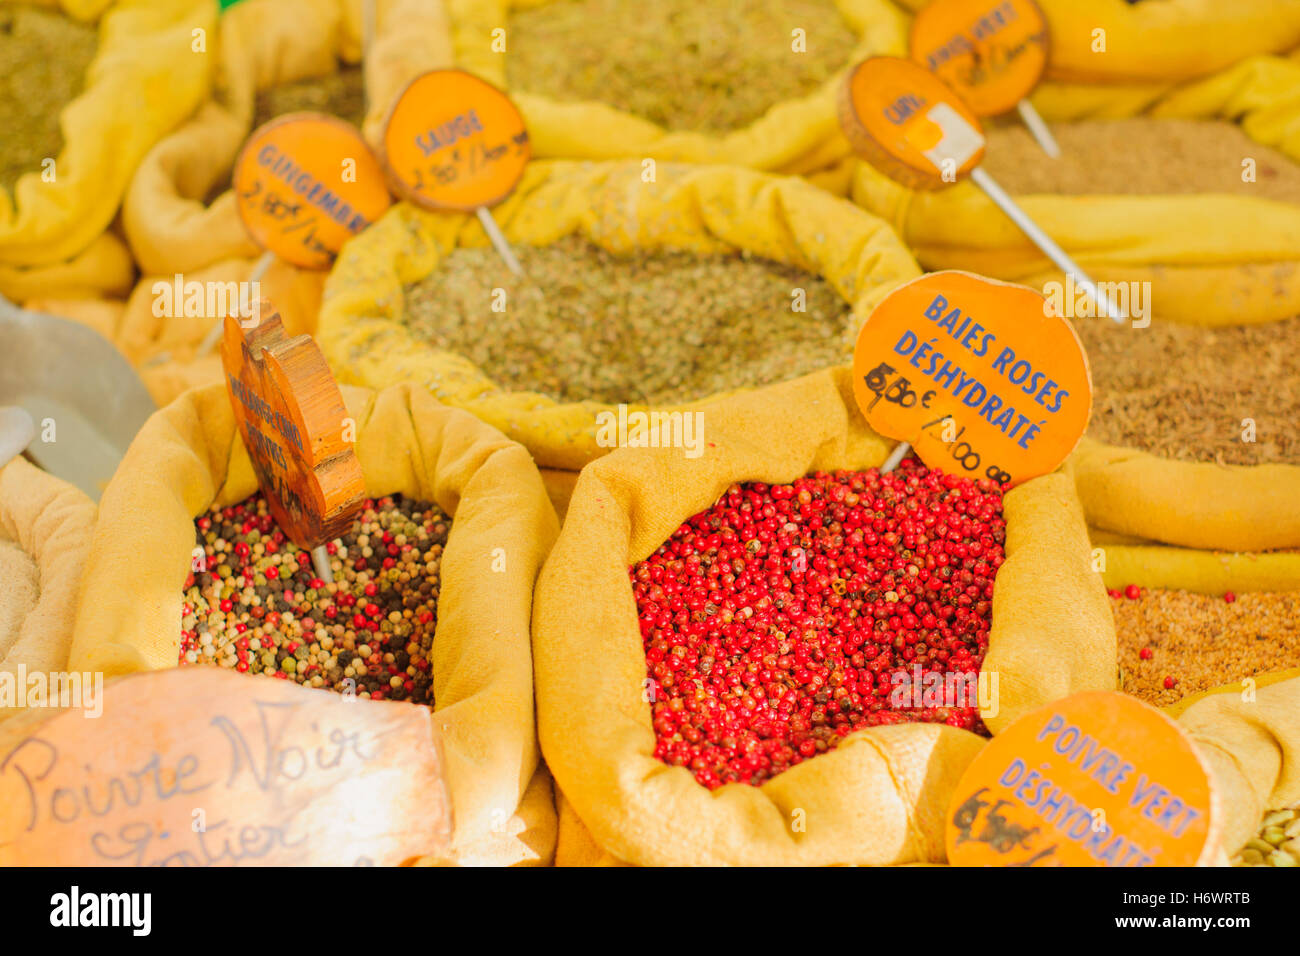 Various spices on sale in a French market, in Ajaccio, Corsica, France Stock Photo